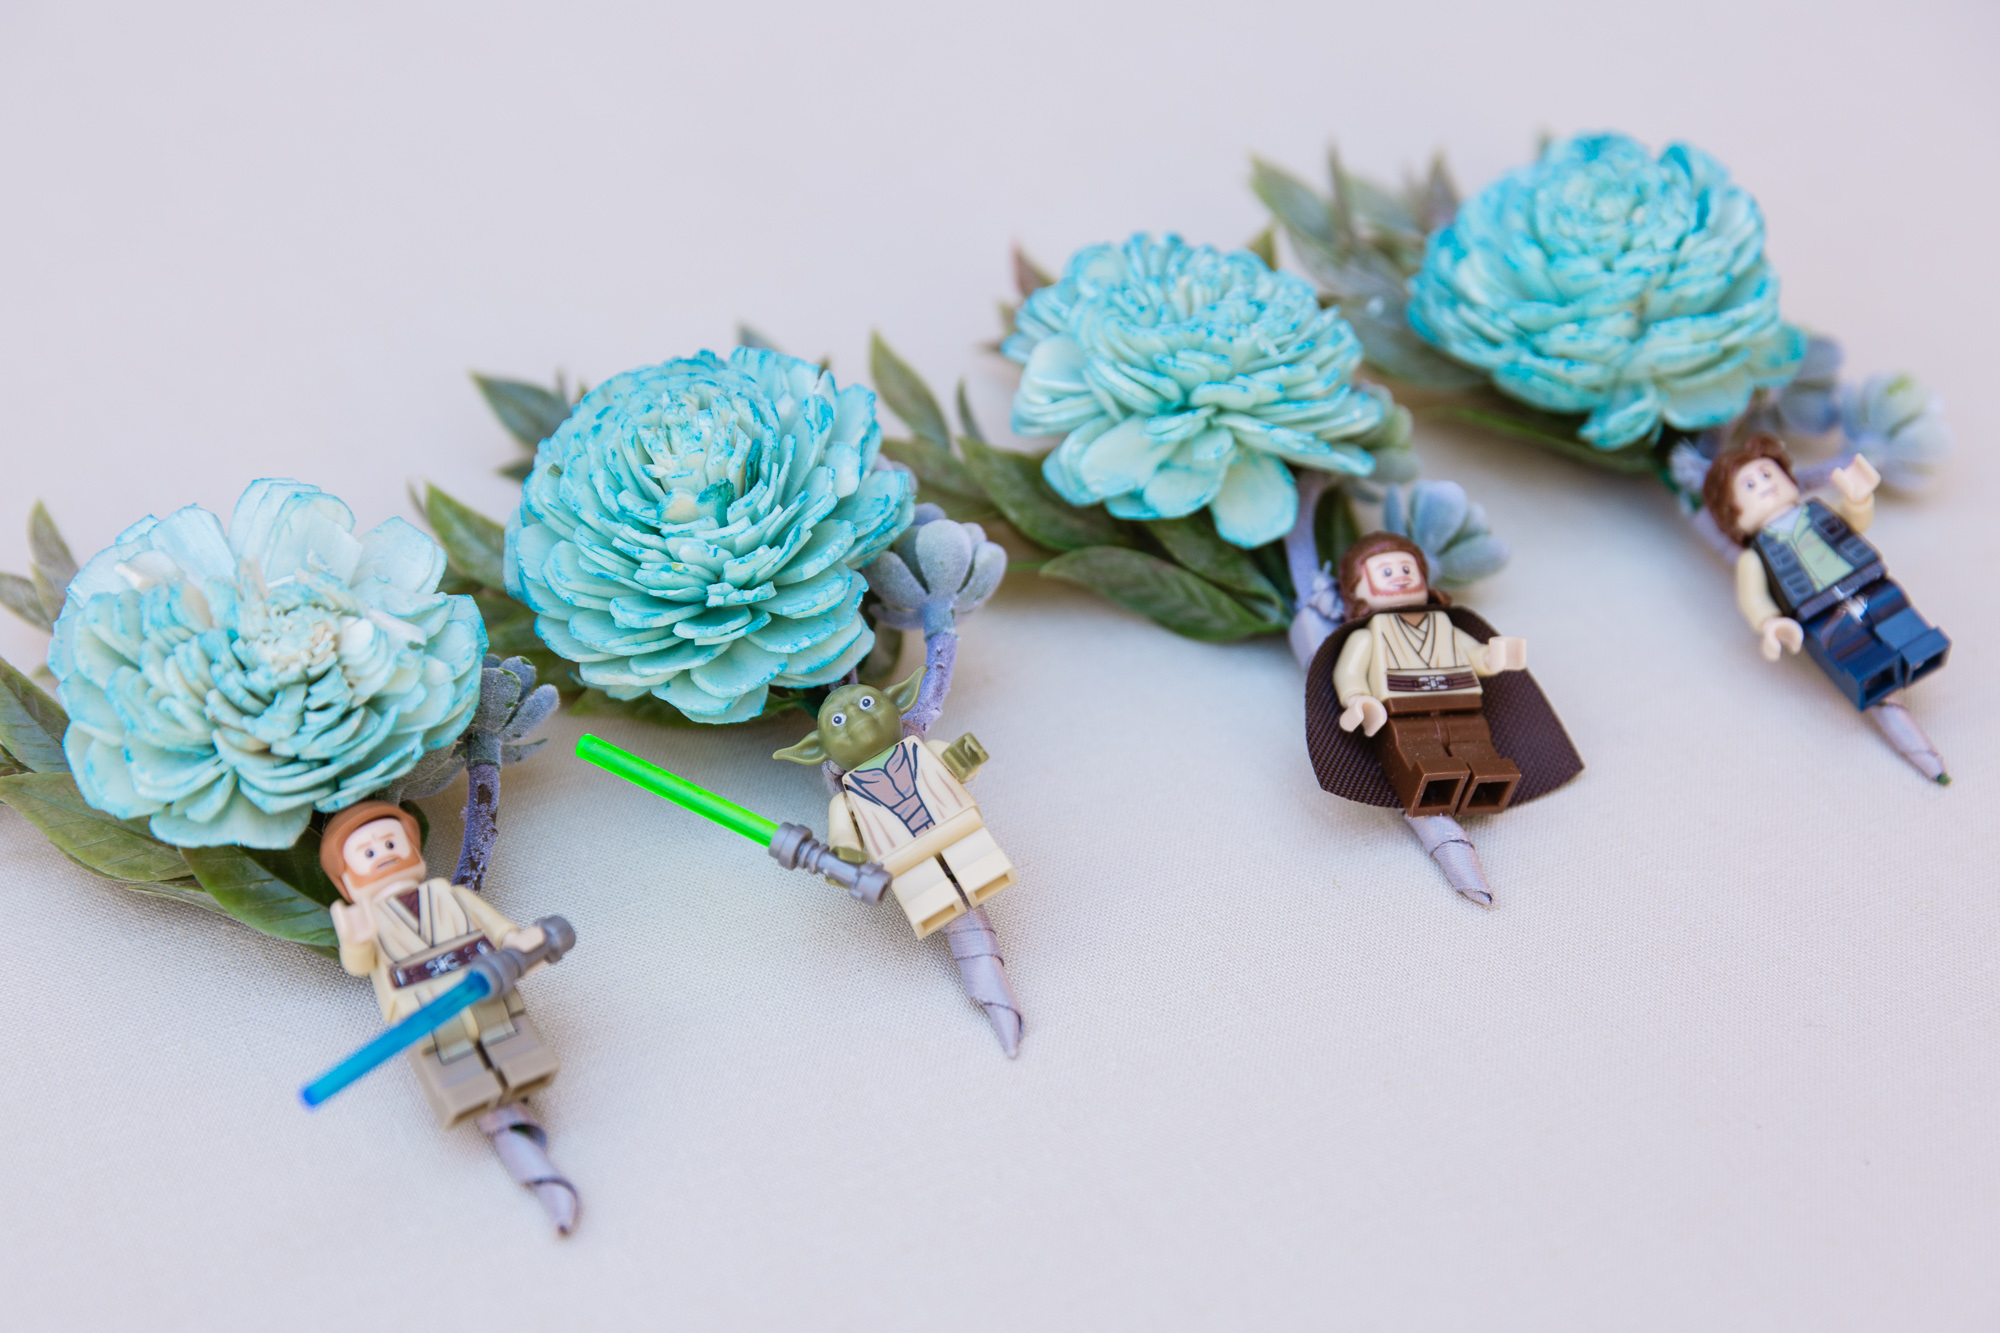 Star Wars Legos and wood flower boutonnieres for the groom and groomsmen by Phoenix wedding photographer PMA Photography.